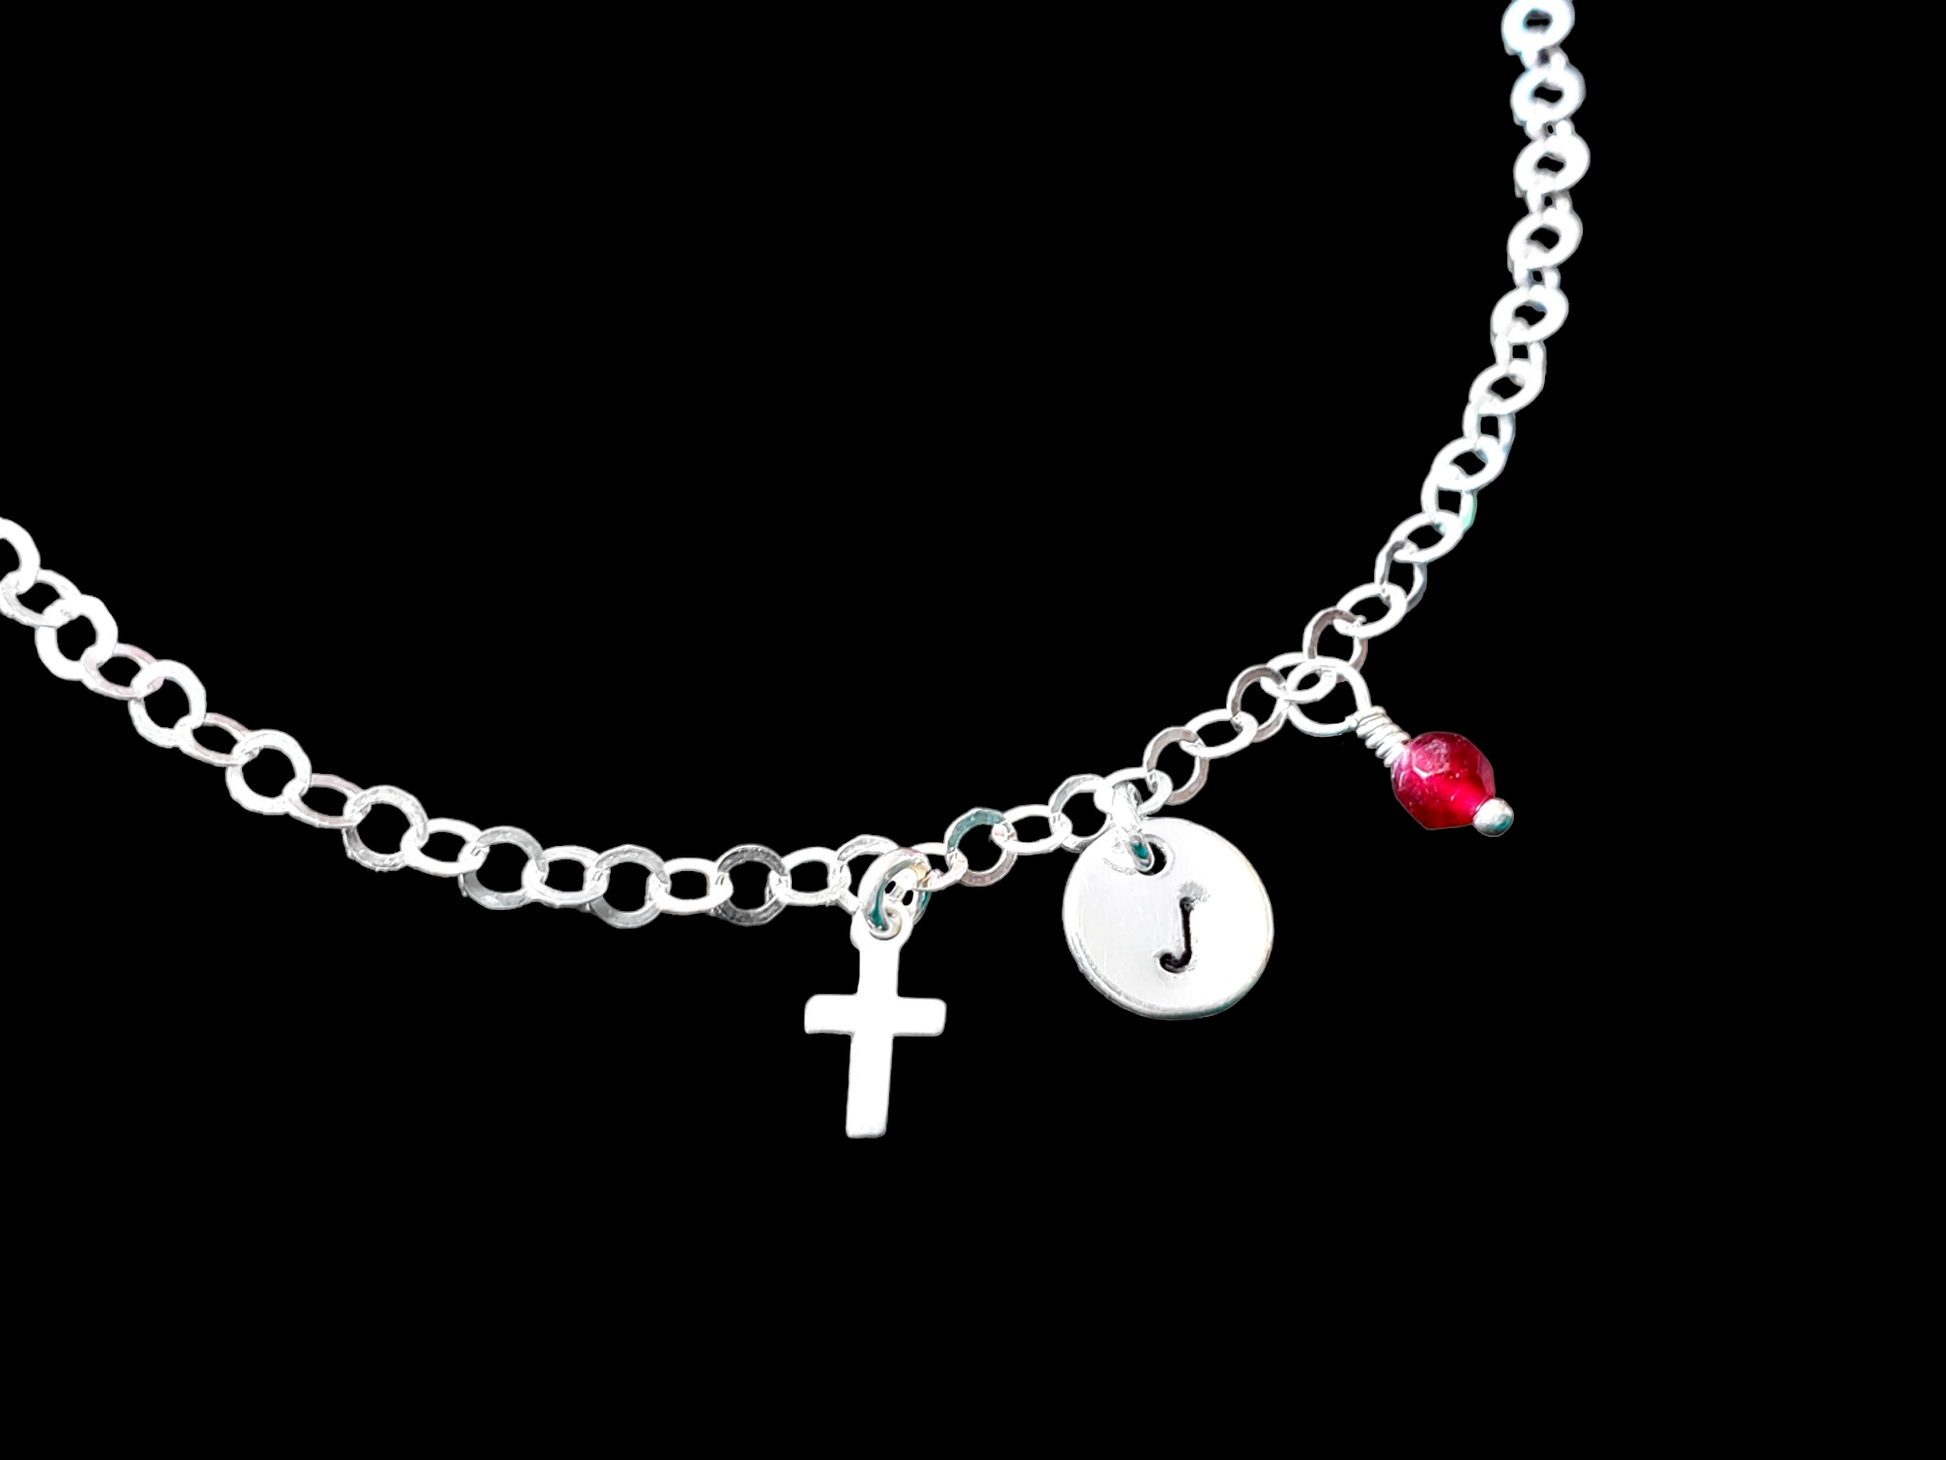 Personalized Cross, Eternity, Birthstone, Initial Anklet-Ankle Bracelet with a Small Cross, Initial pendant, Birthstone and Celtic Eternity Coil dangle on sparkly chain